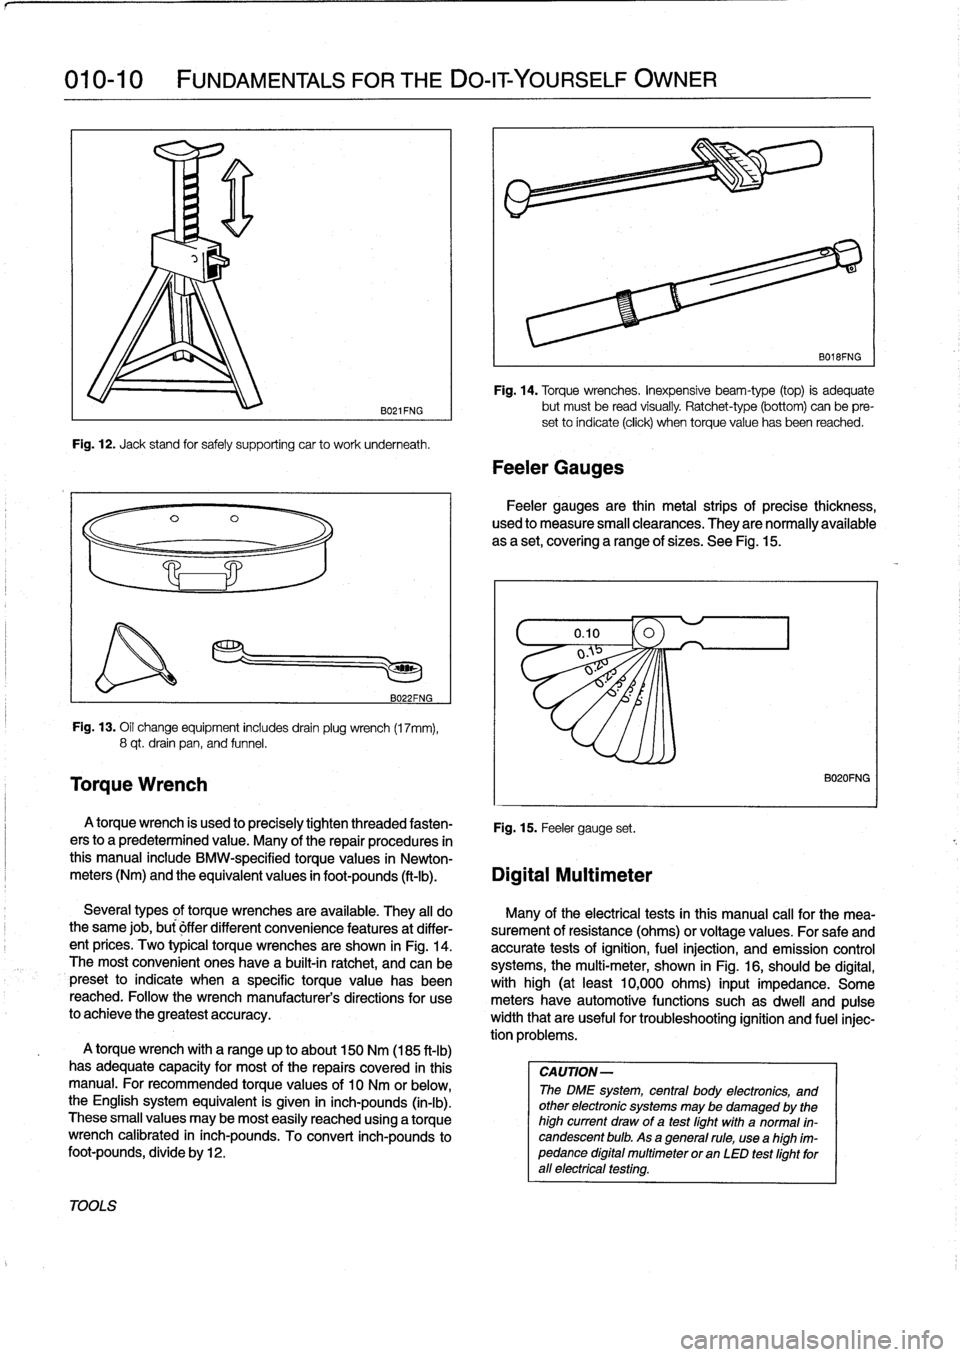 BMW 323i 1992 E36 Workshop Manual 
010-10

	

FUNDAMENTALS
FOR
THE
DO-IT
YOURSELF
OWNER

TOOLS

Torque
Wrench

B021FNG

Fig
.
12
.
Jack
stand
for
safely
supporting
car
to
work
underneath
.

B022FNG

Fig
.
13
.
Oil
change
equipment
inc